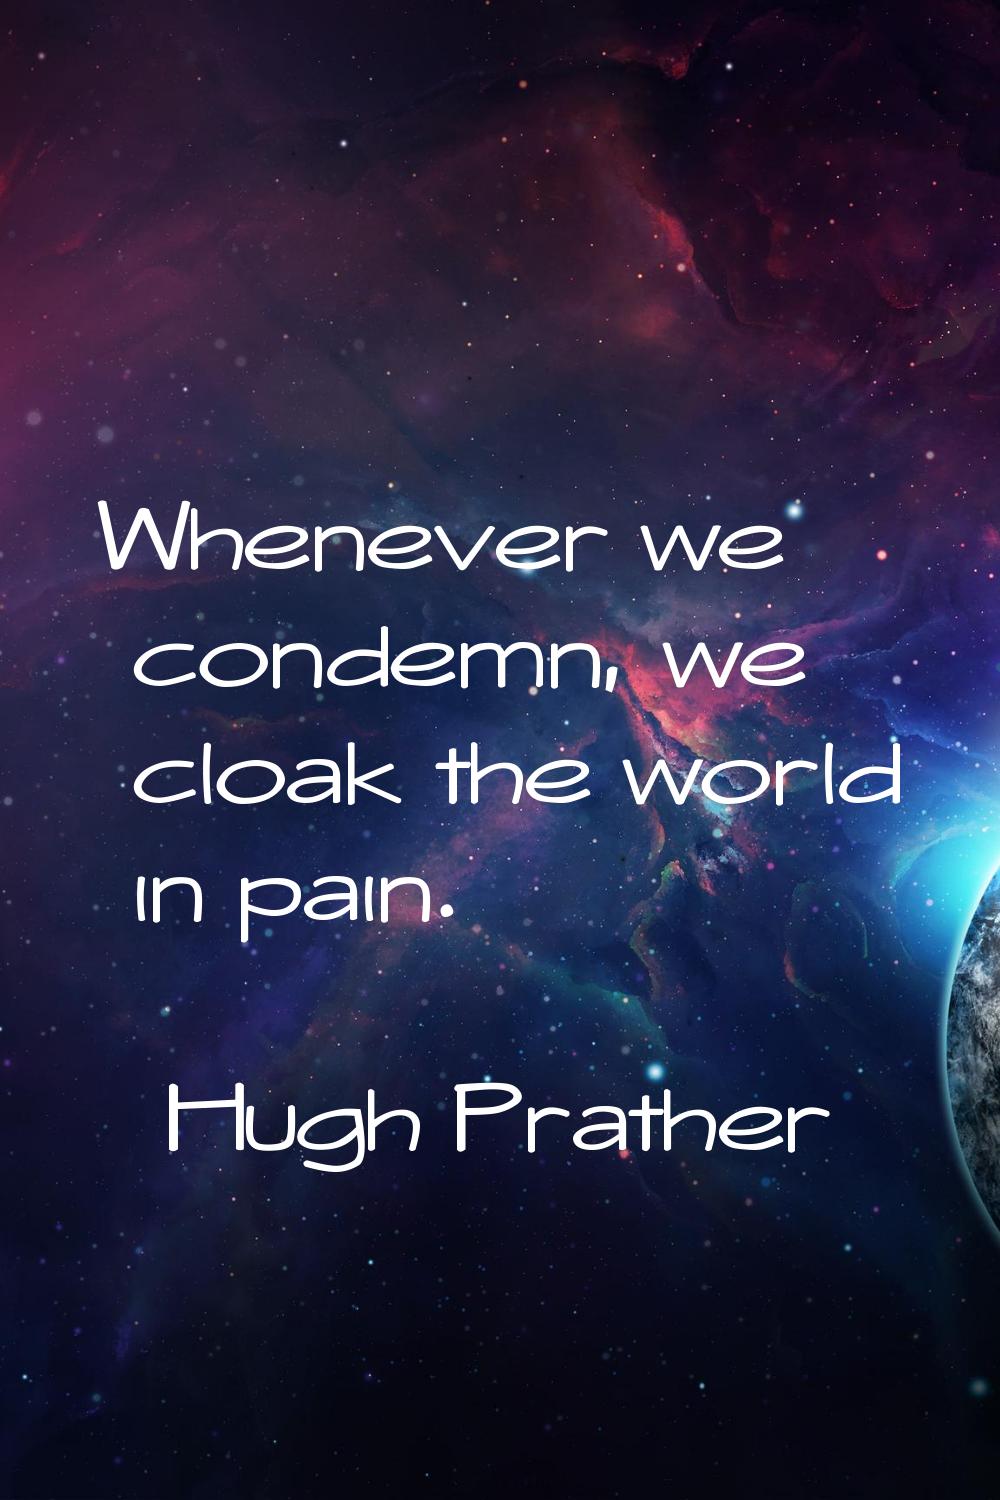 Whenever we condemn, we cloak the world in pain.